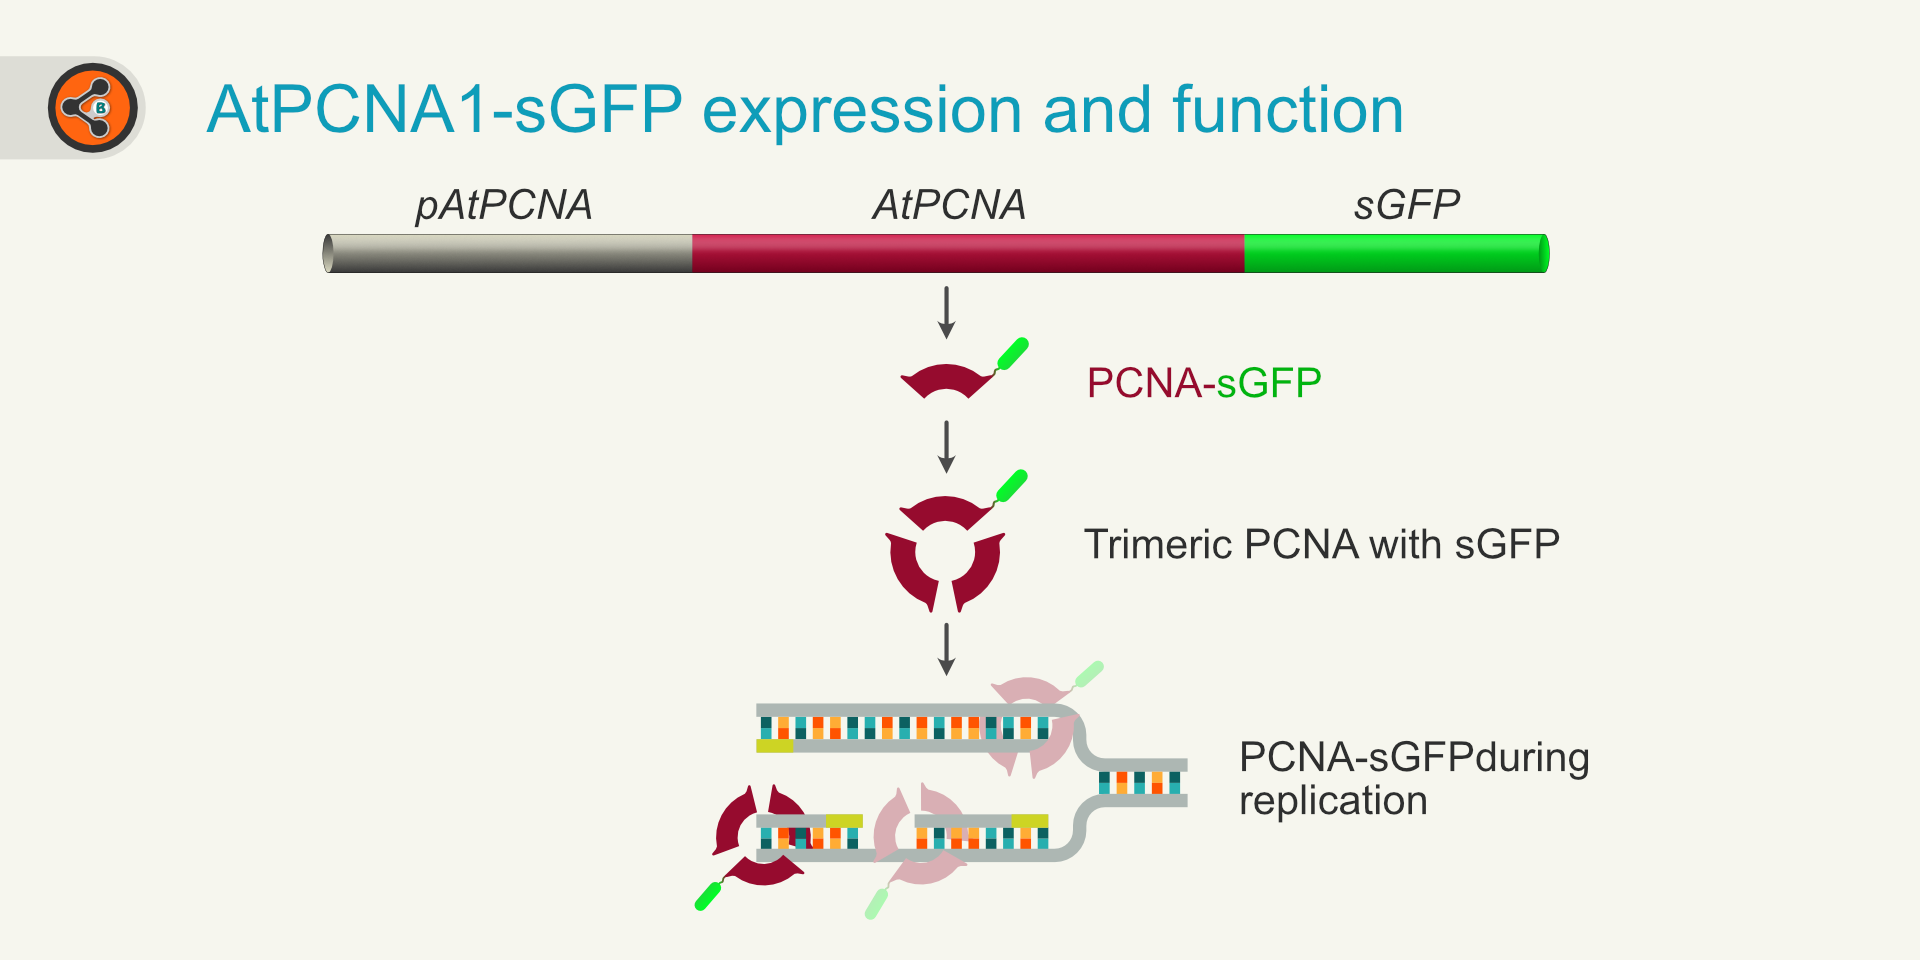 illustration showing the expression and function of AtPCNA-sGFP.